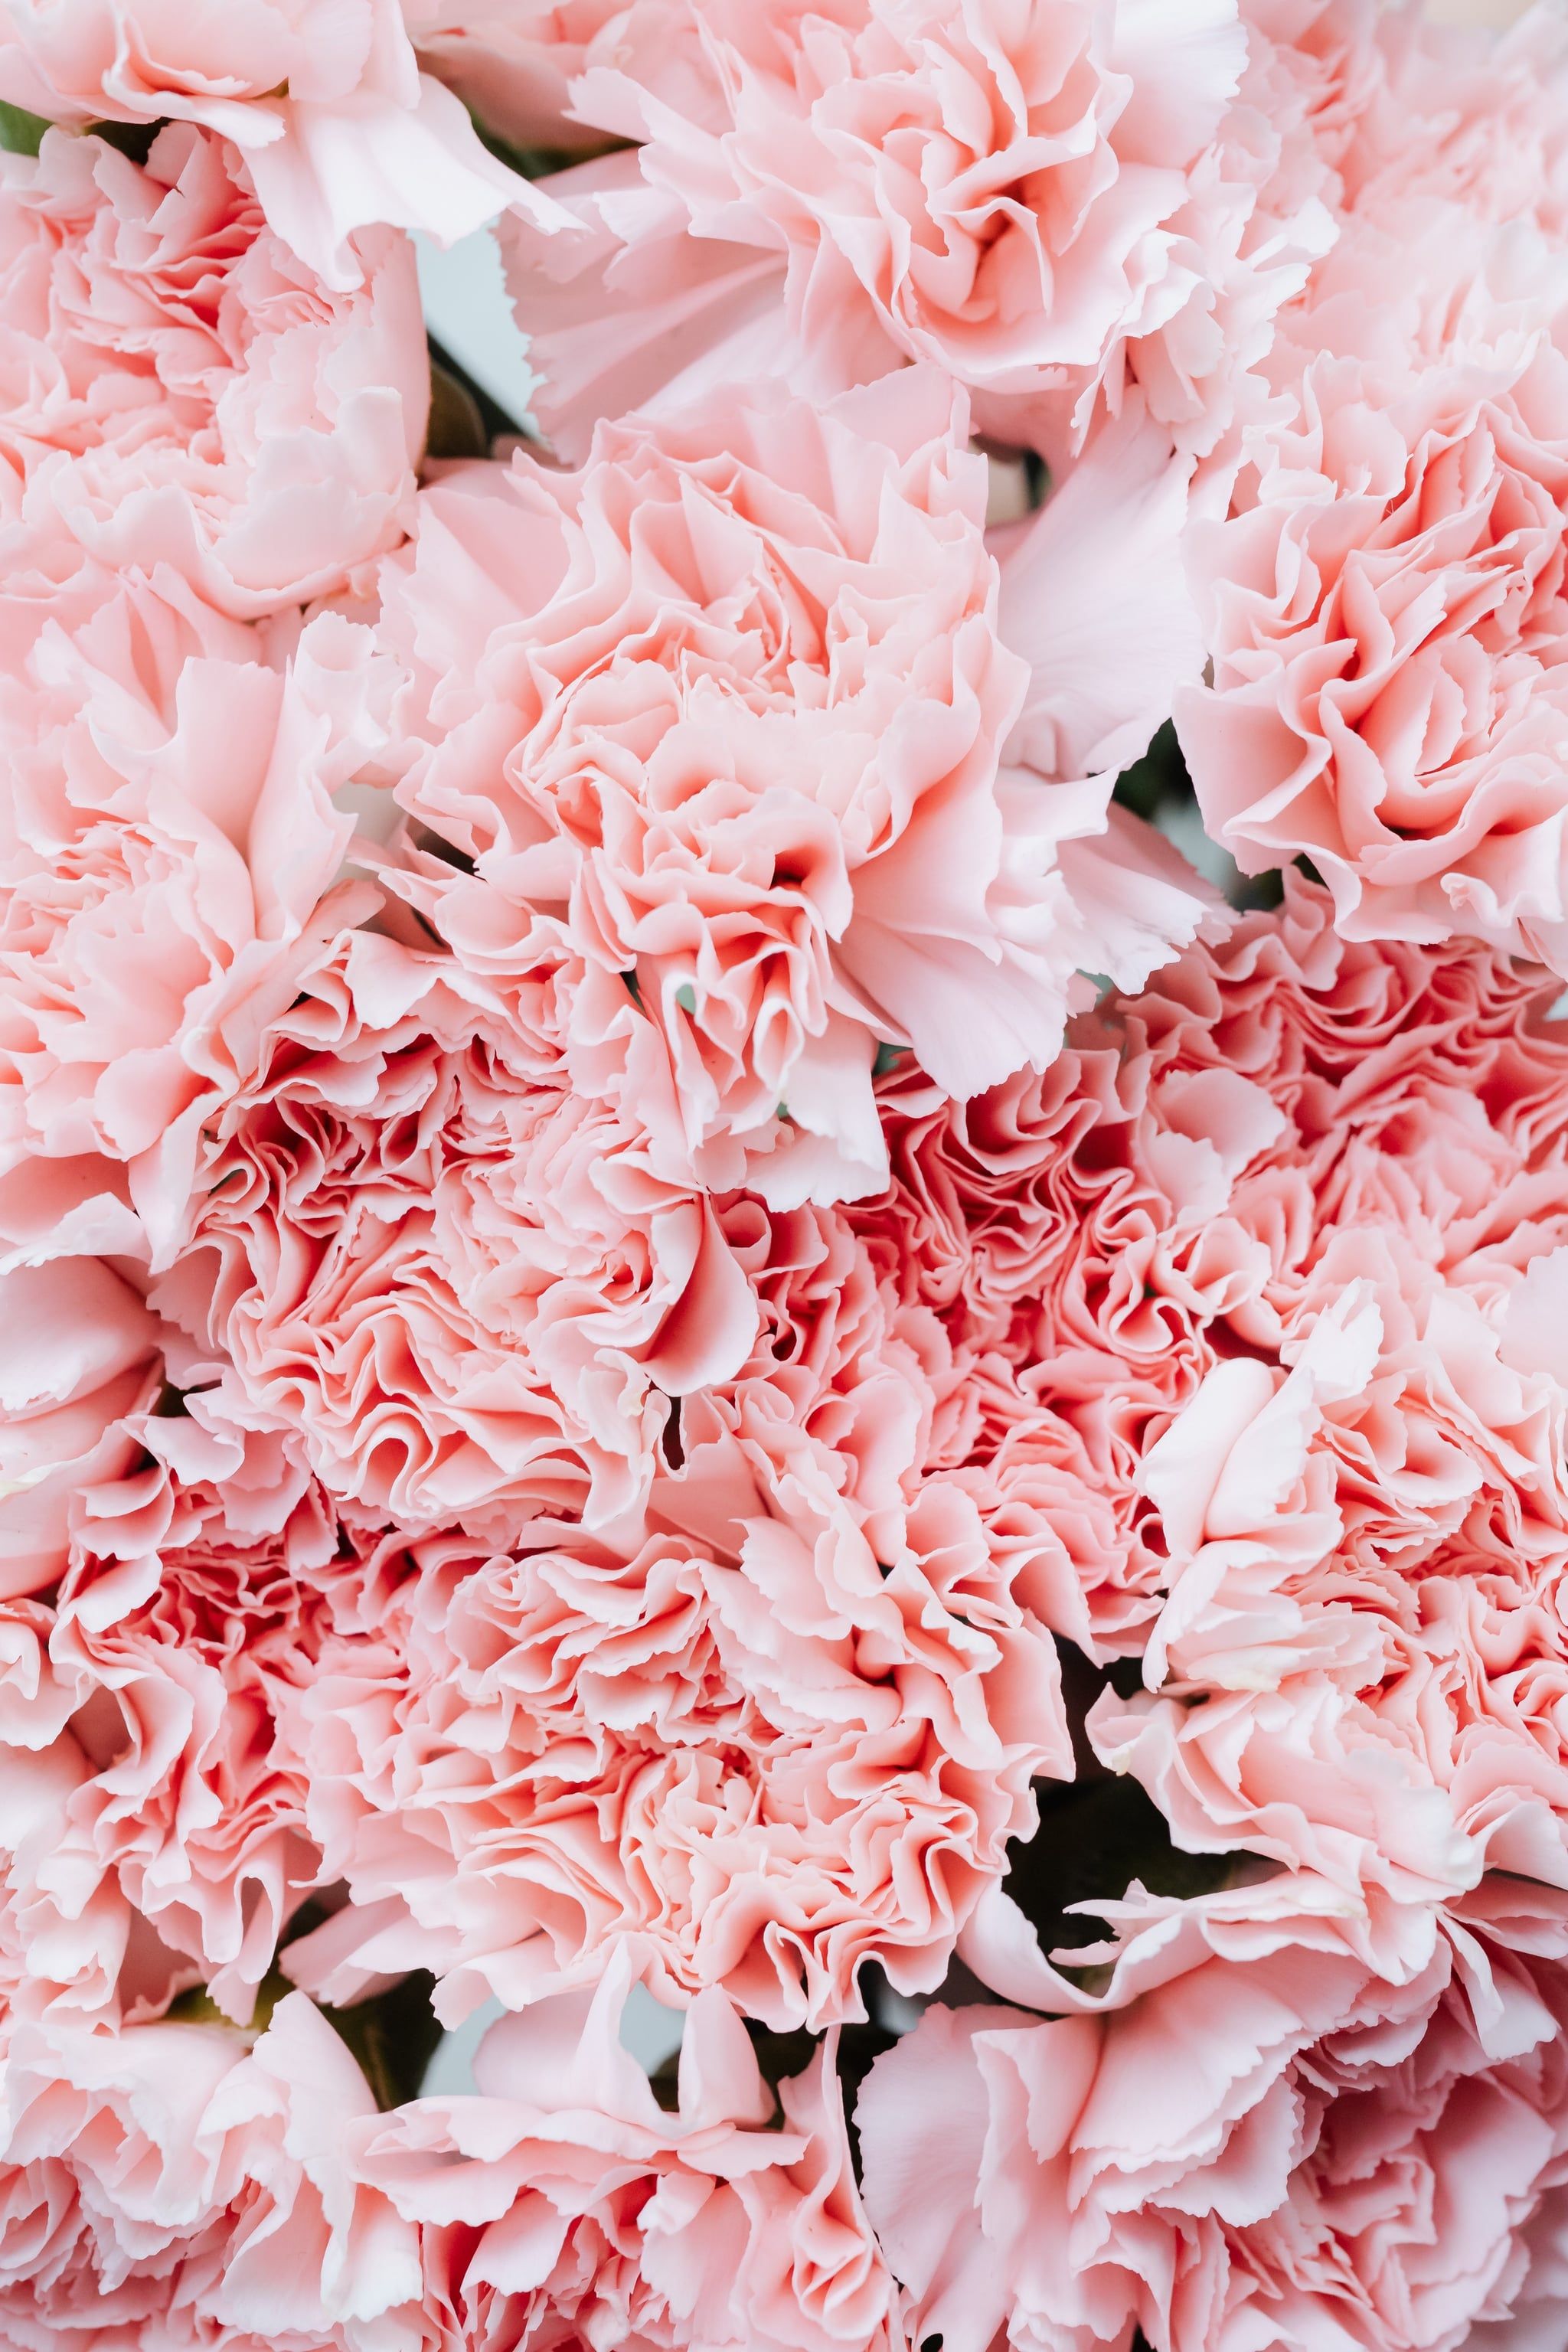 Pink Flower iPhone Wallpaper. The Best Wallpaper Ideas That'll Make Your Phone Look Aesthetically Pleasing